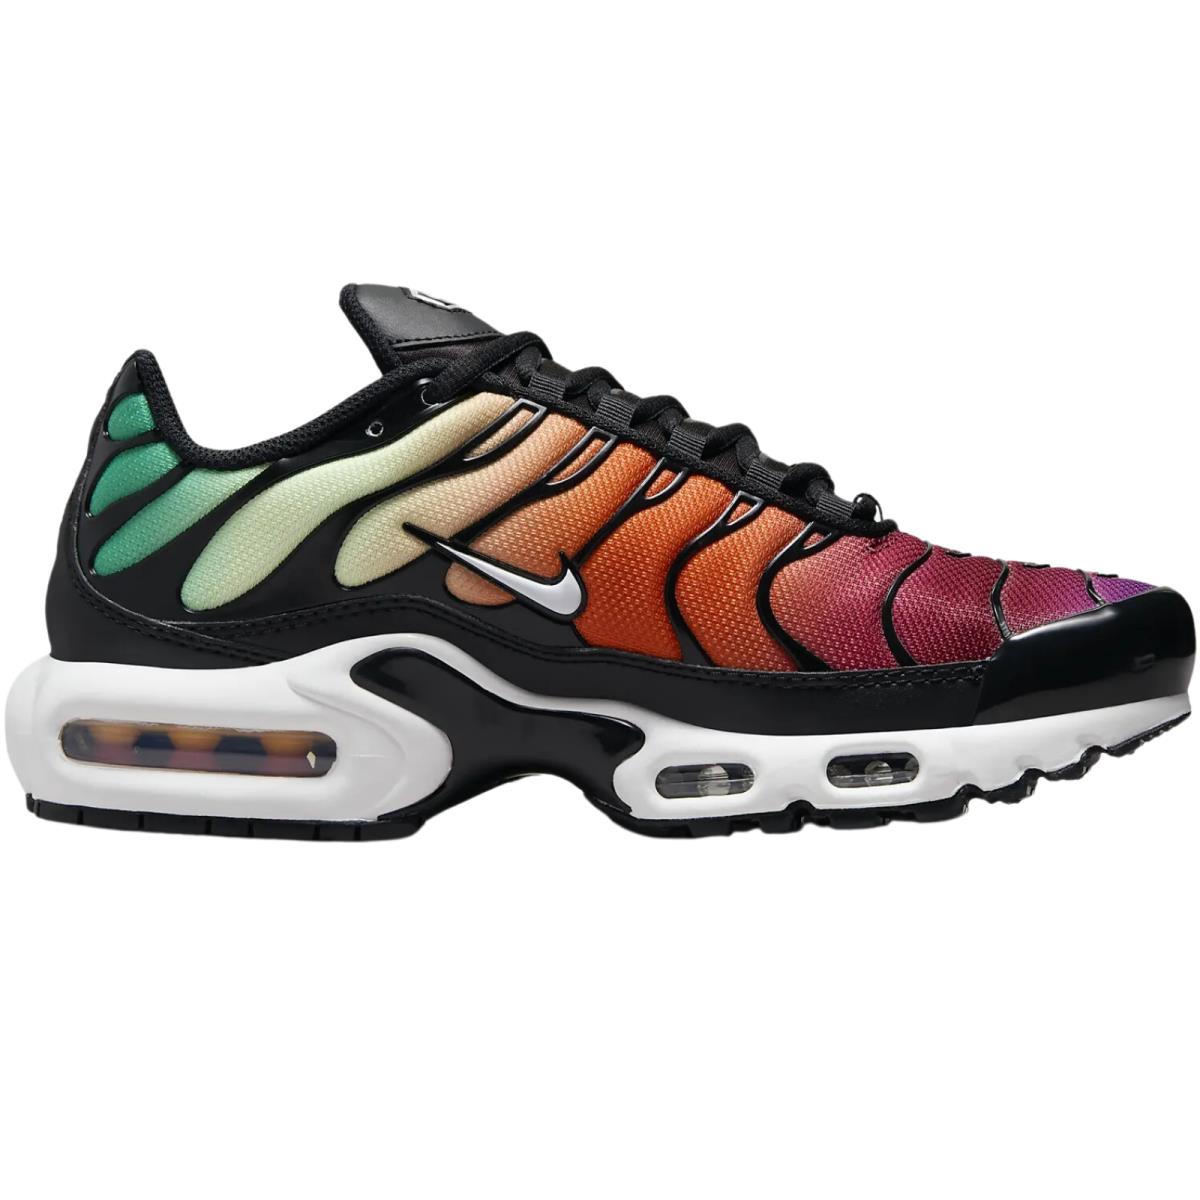 Nike Air Max Plus Women`s Casual Shoes All Colors US Sizes 6-11 Black/Viotech/Team Red/White